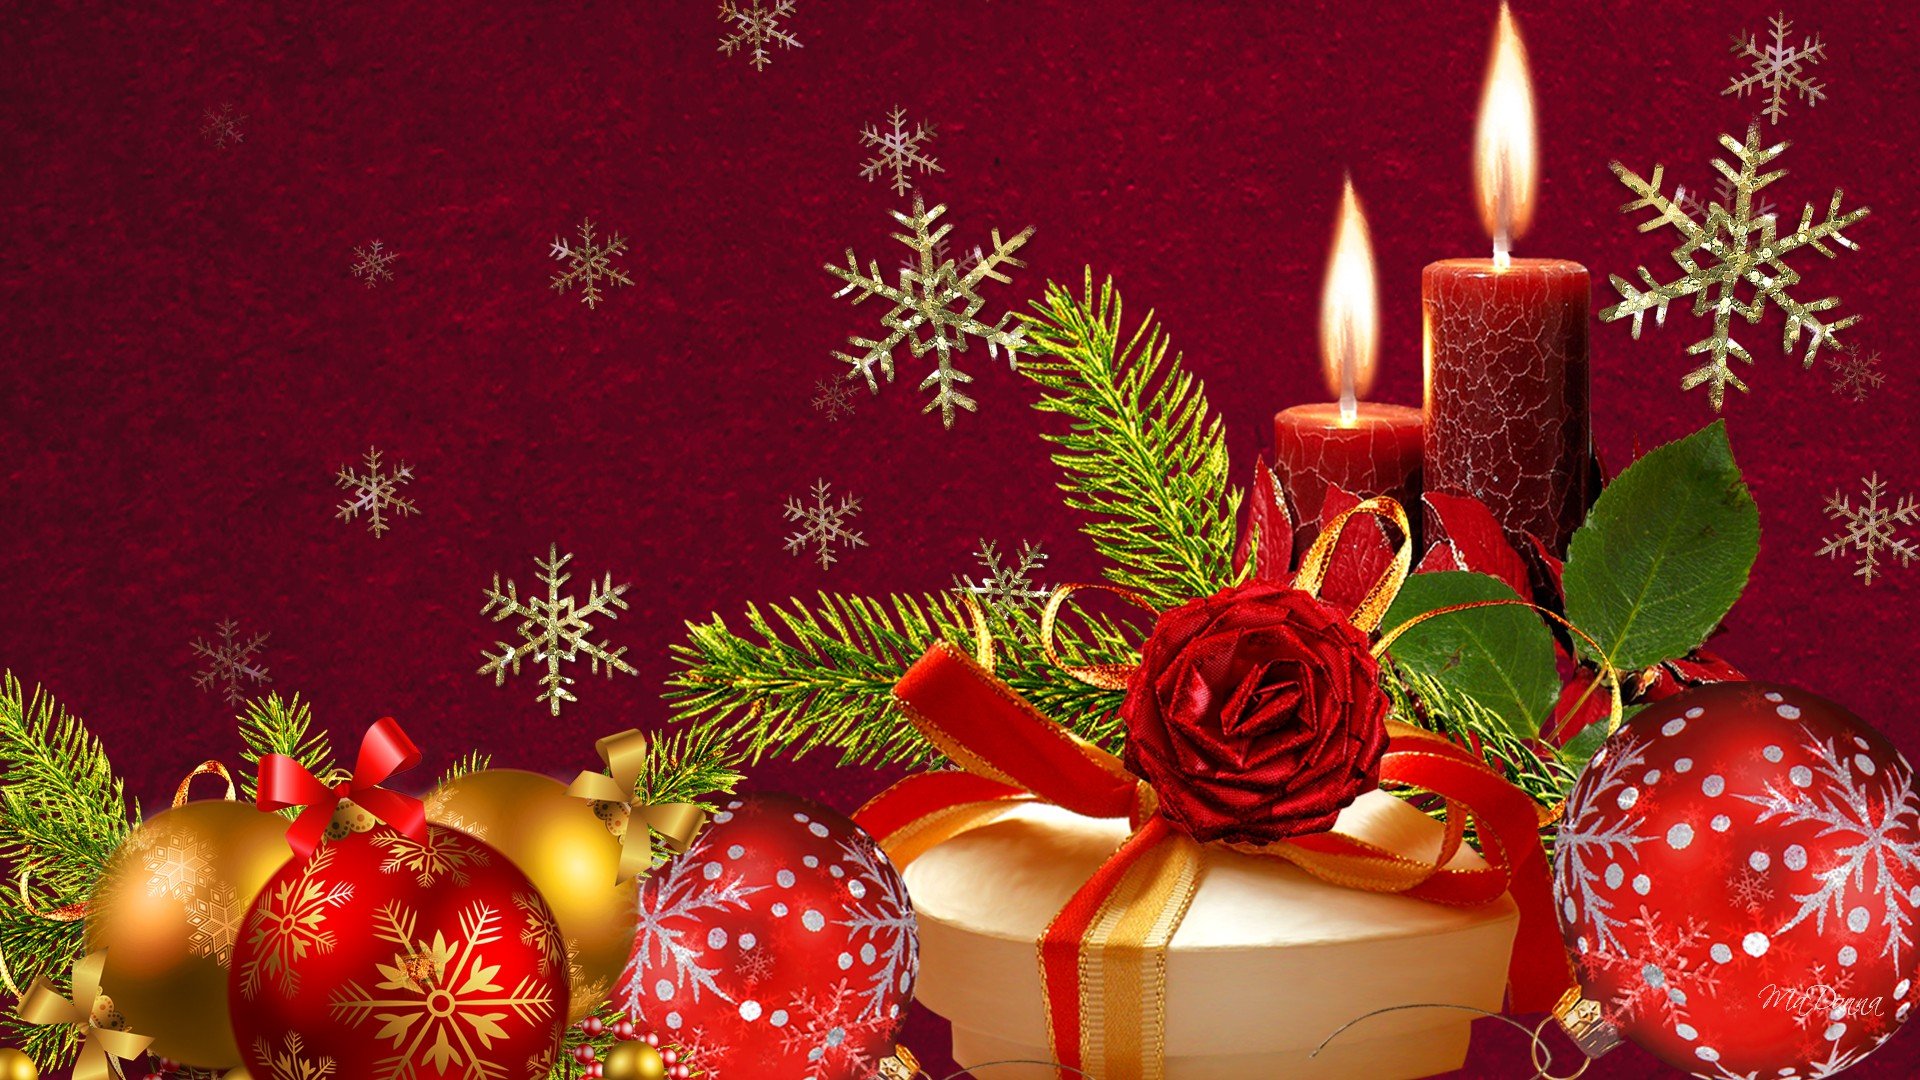 Red and Green Christmas   Backgrounds Wallpapers Pictures Pics 1920x1080